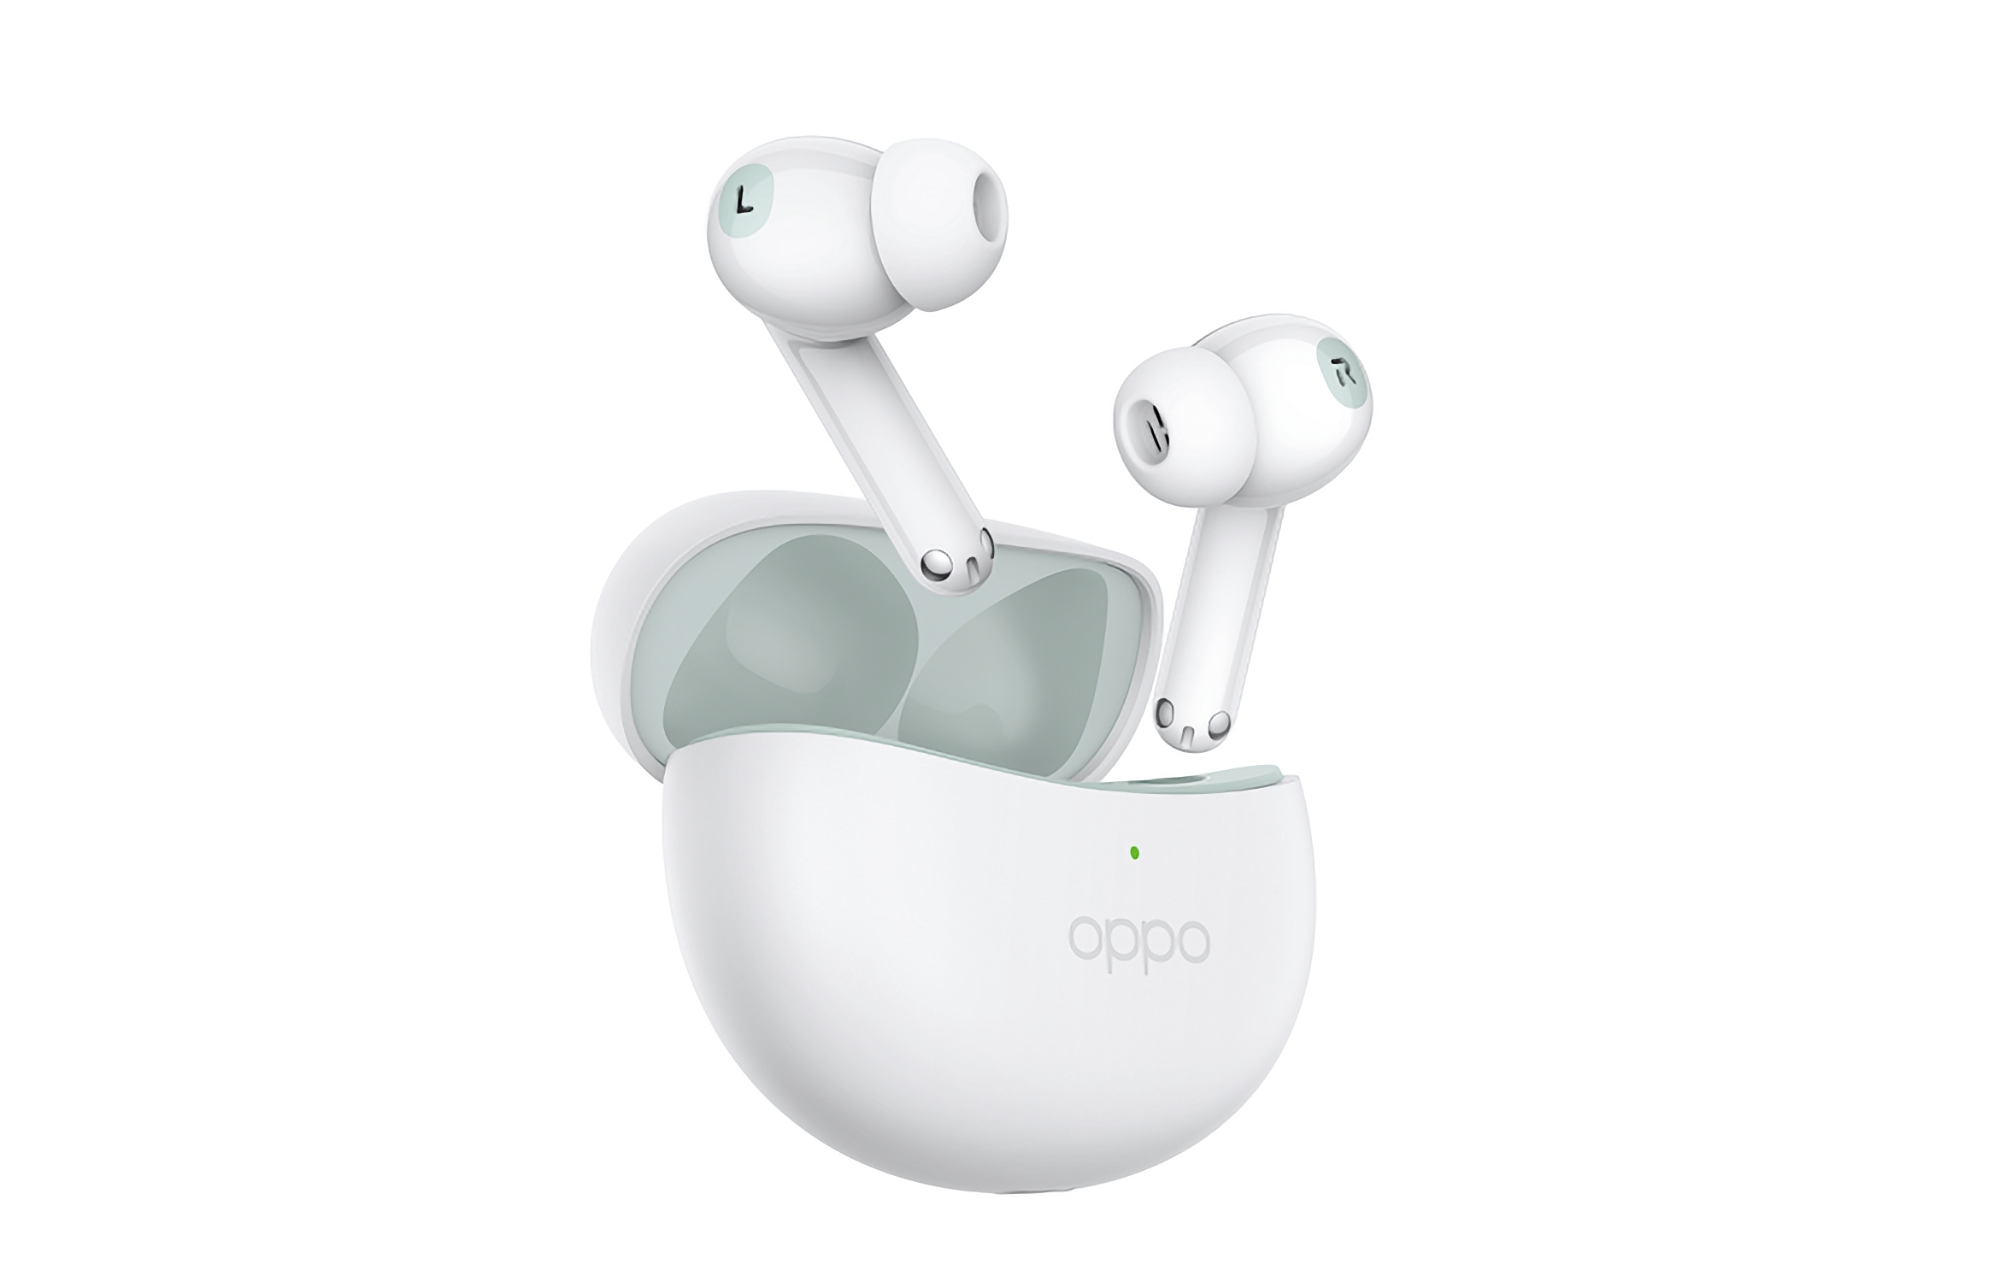 OPPO is preparing to release Enco R Pro TWS earphones with ANC and 12.4-mm drivers for $70